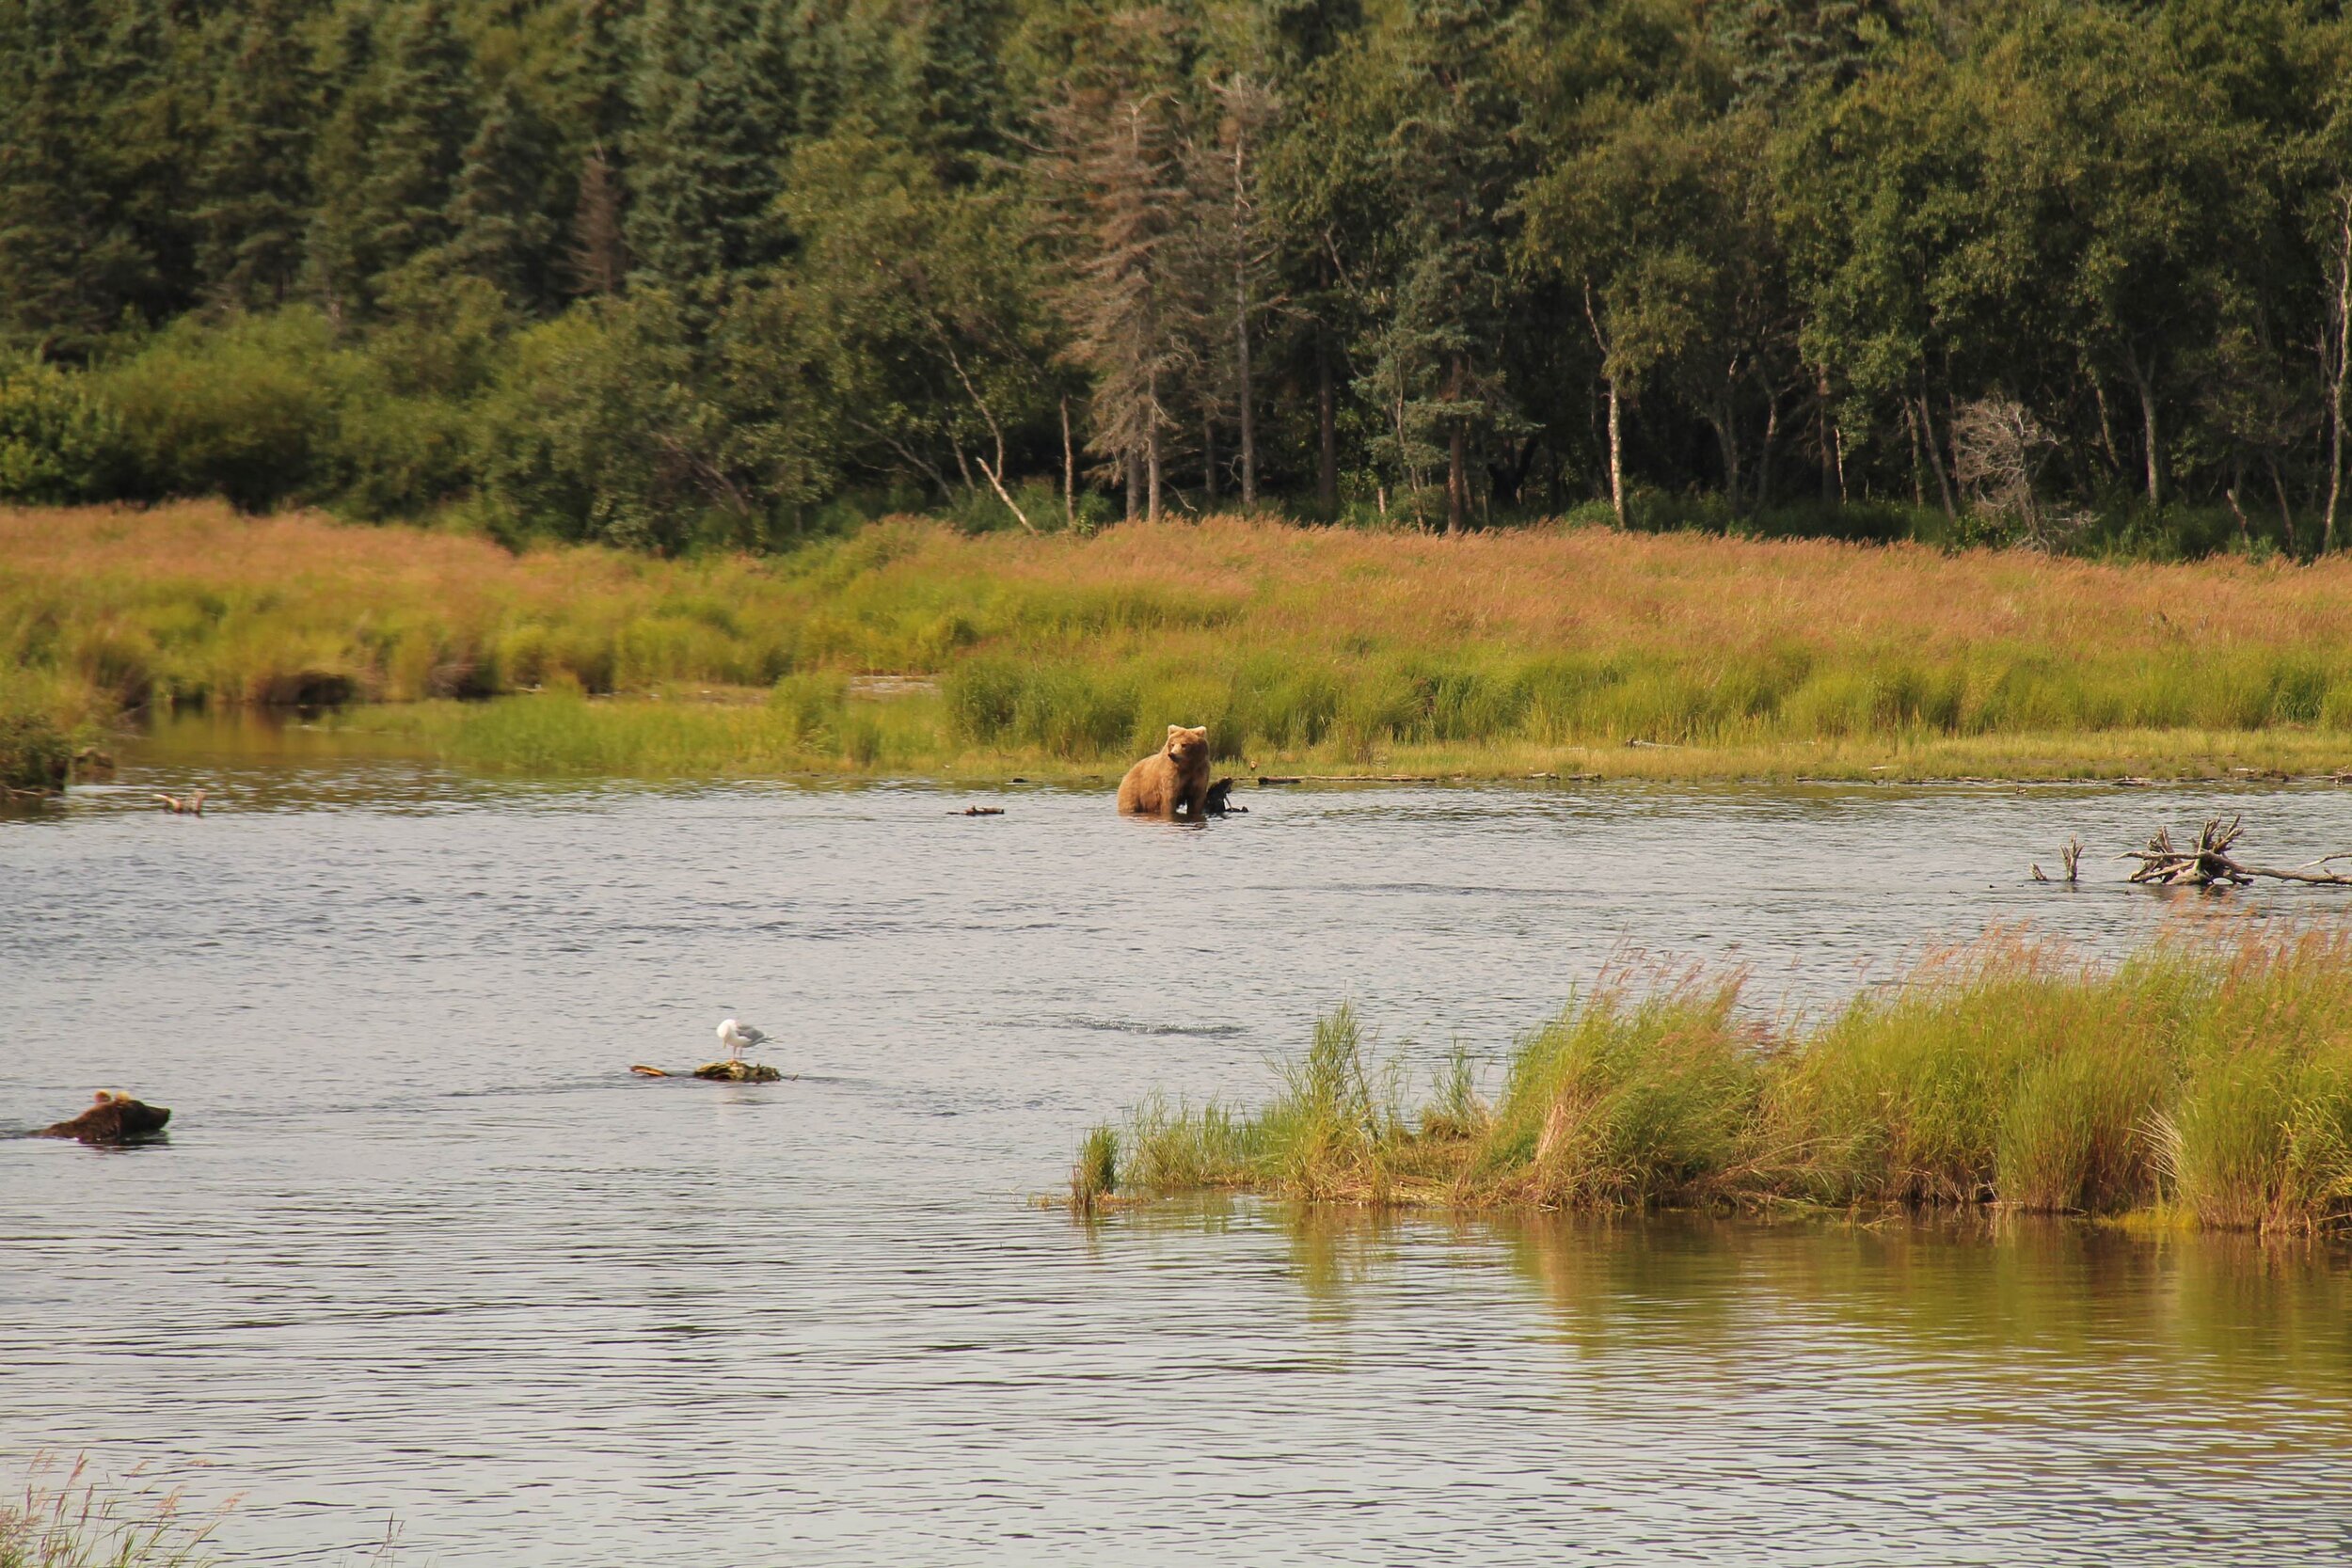  An Alaskan landscape featuring a forested background with two brown bears swimming in a body of water and a gull perched on a floating log.  